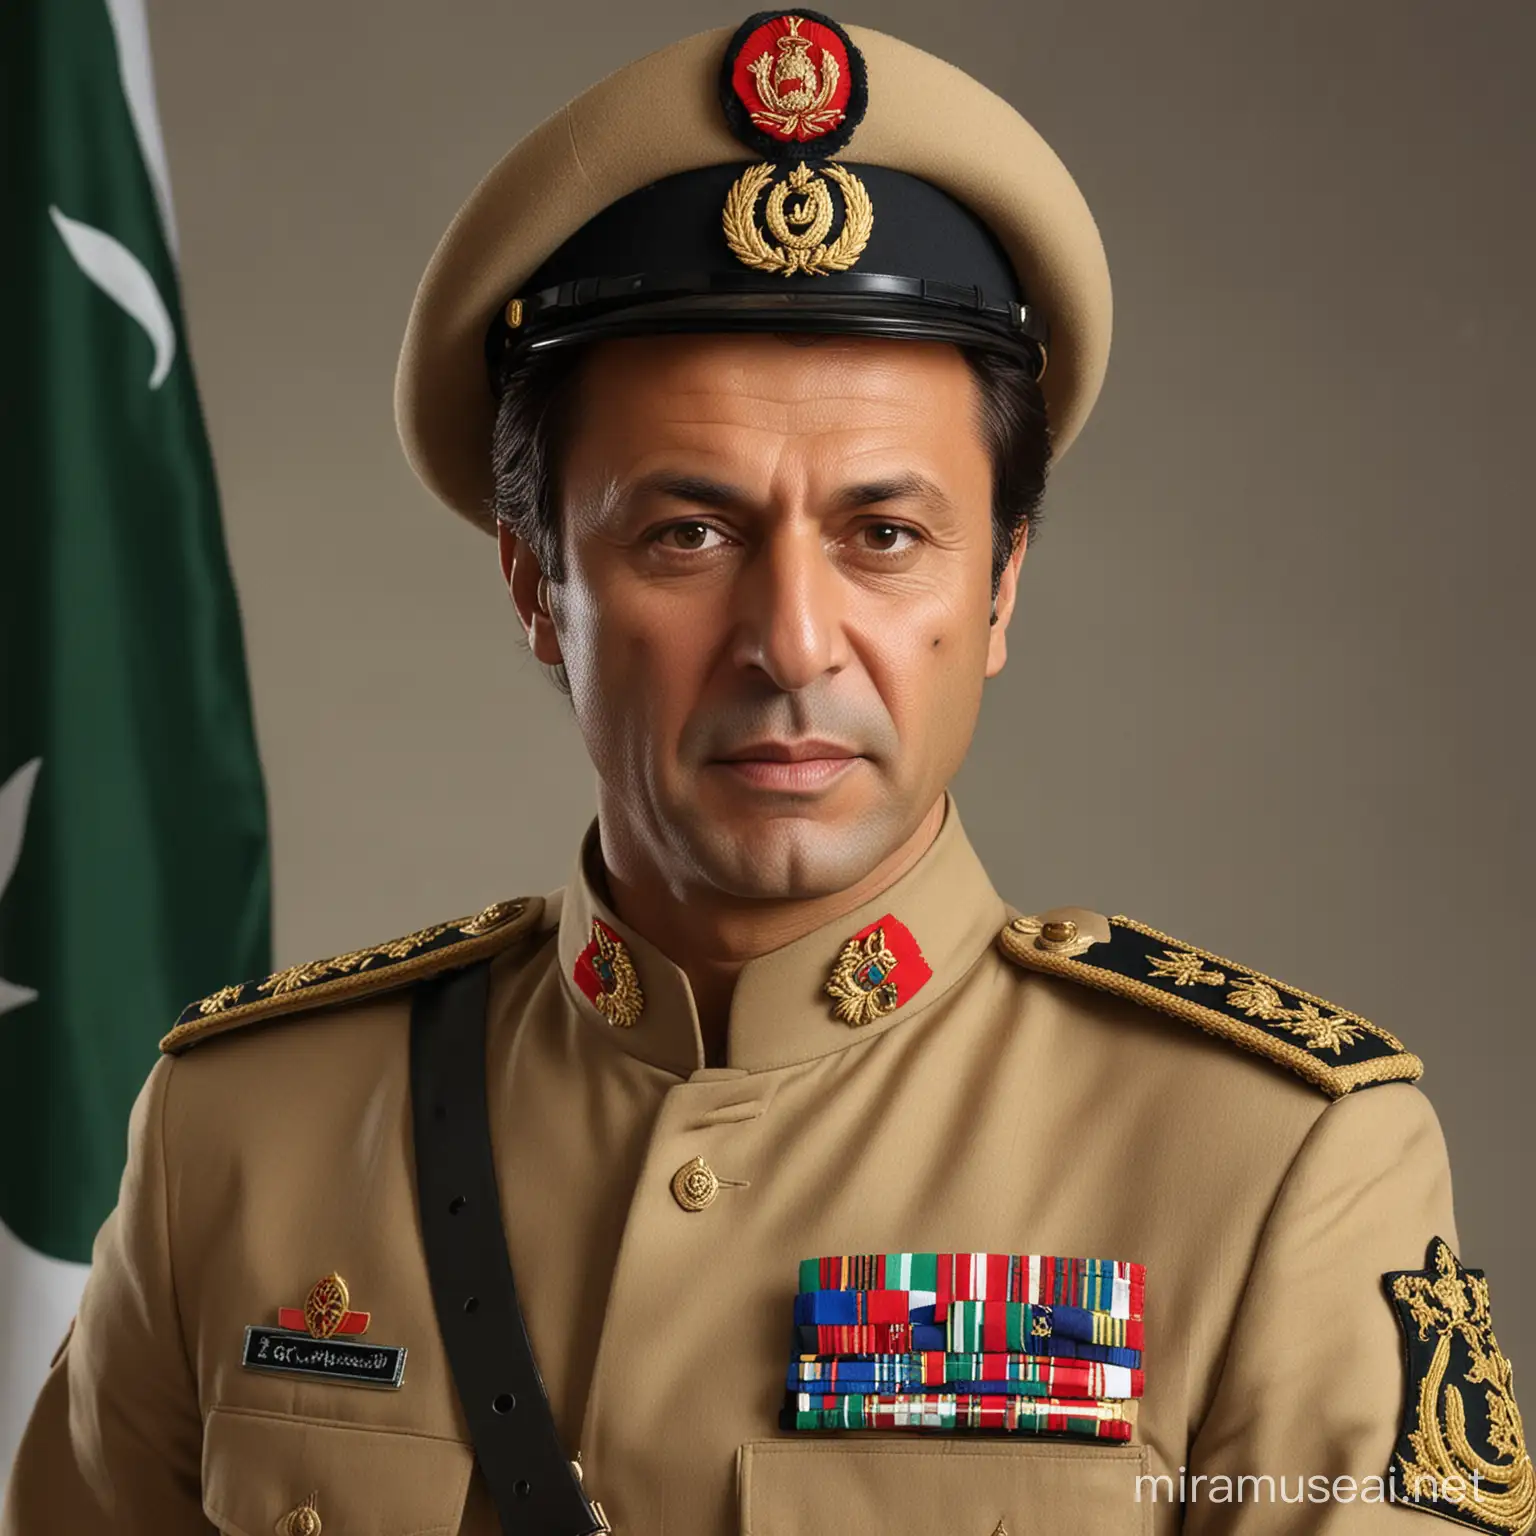 "Generate an image of Imran Khan dressed in the uniform of the Pakistani Army Chief. Show him adorned in the traditional military attire, complete with insignia, badges, and ribbons. Capture his demeanor as confident and authoritative, embodying the leadership qualities associated with the role of the Army Chief. Set the scene against a backdrop that evokes the solemnity and strength of the Pakistani military."